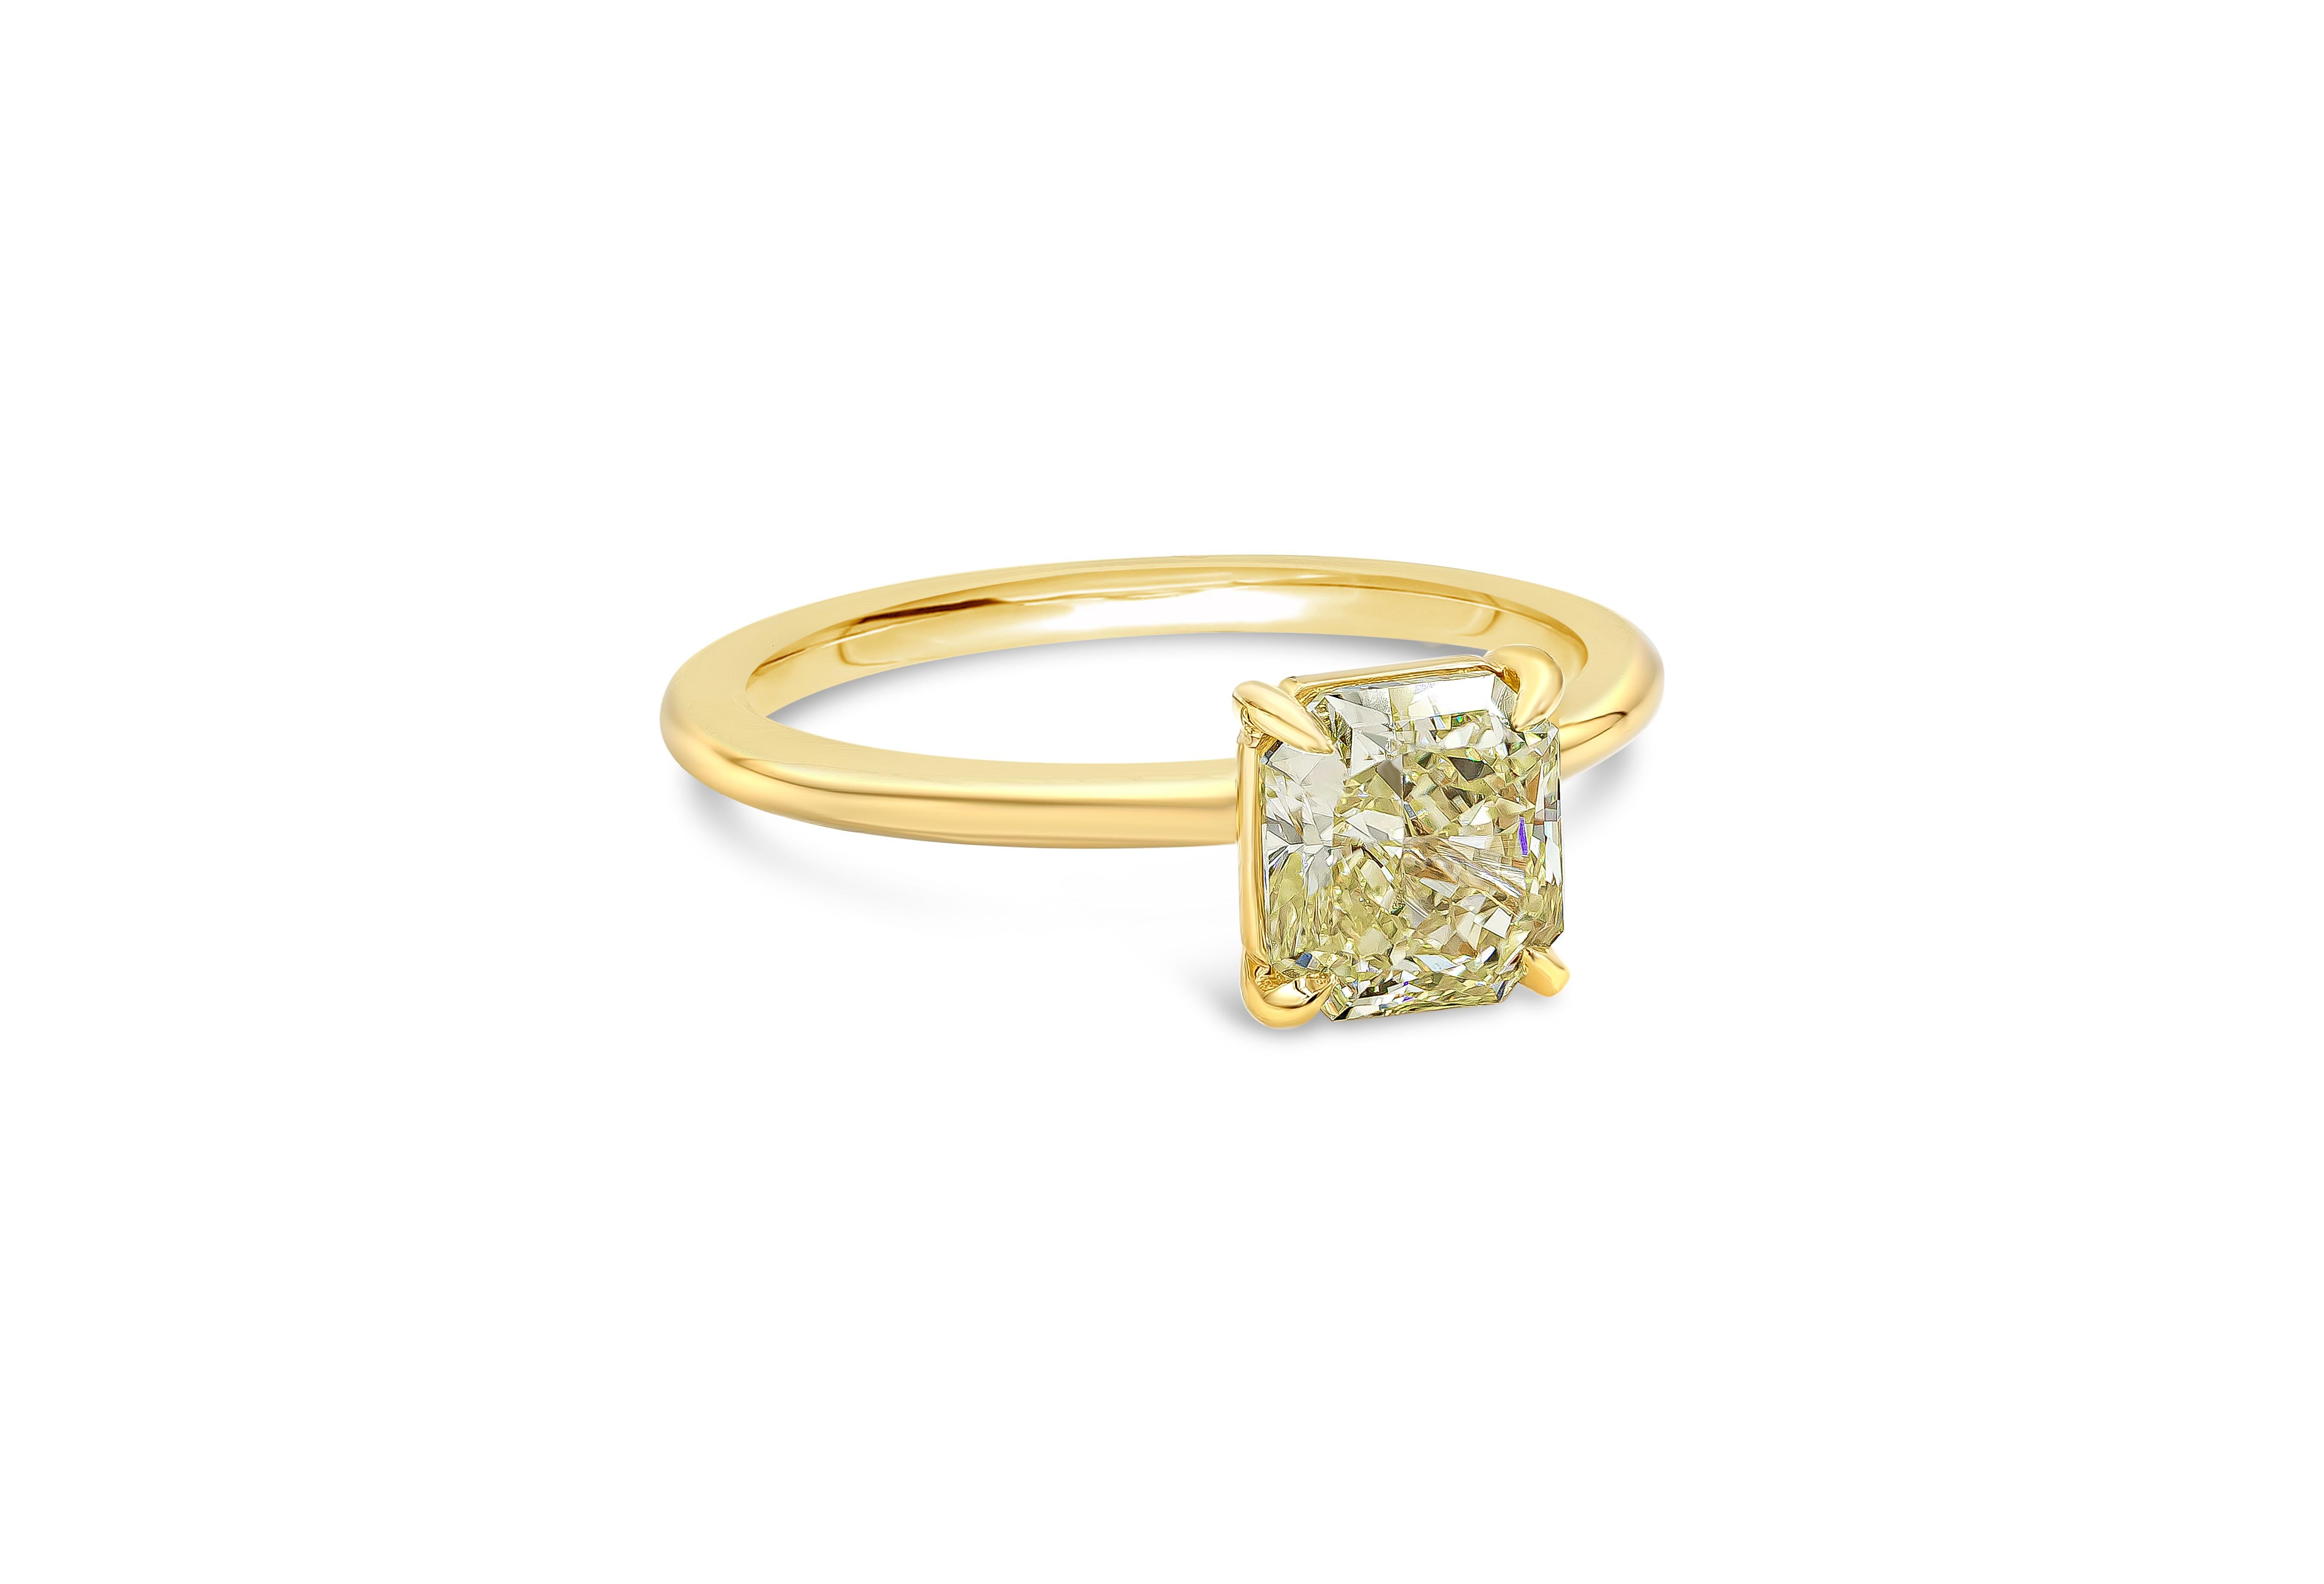 A timeless solitaire engagement ring, featuring a color-rich 1.35 carat radiant cut yellow diamond certified by GIA as Fancy Intense Yellow color and VS2 clarity. Set in a thin polished 18K yellow gold mounting.

Roman Malakov is a custom house,